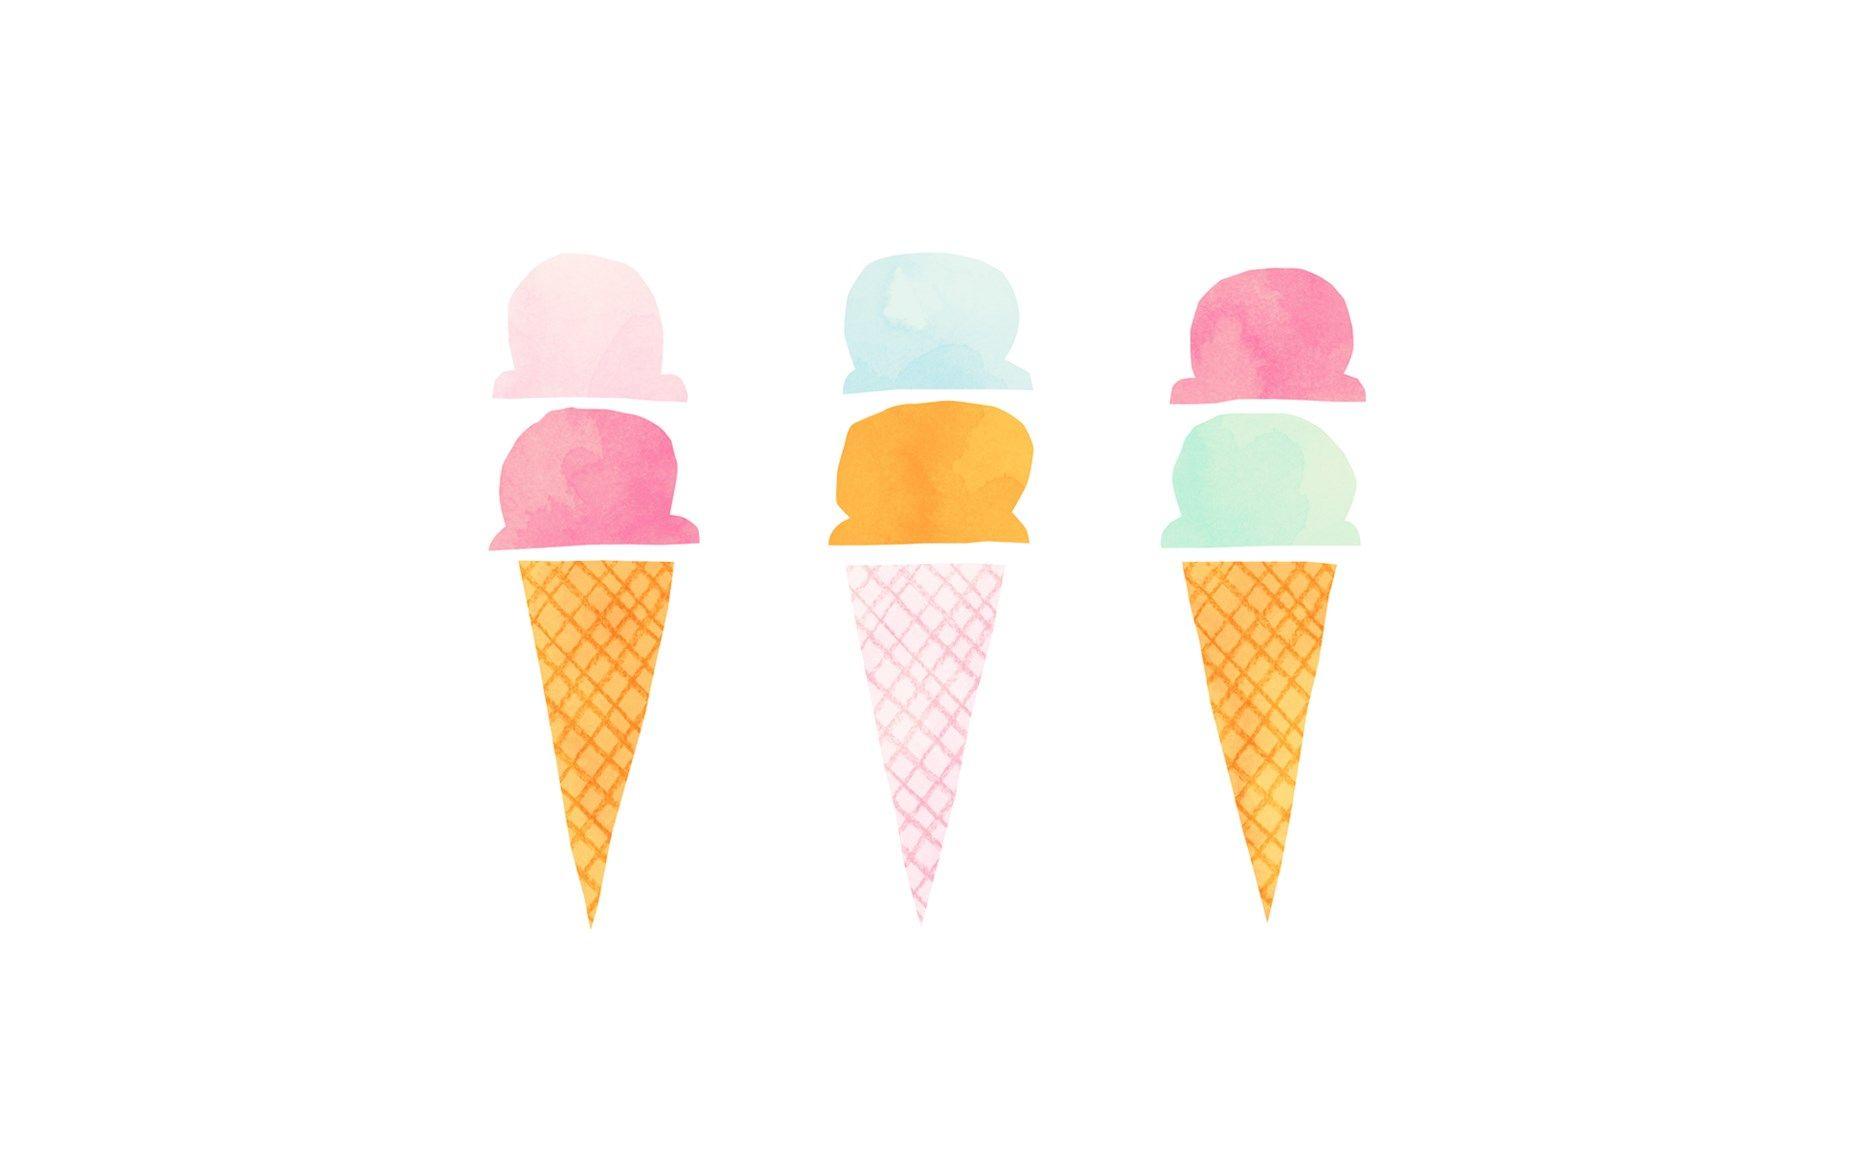 Kawaii Ice Cream Cone Wallpaper Iphone Background Cute Pictures Of Ice  Cream Background Image And Wallpaper for Free Download